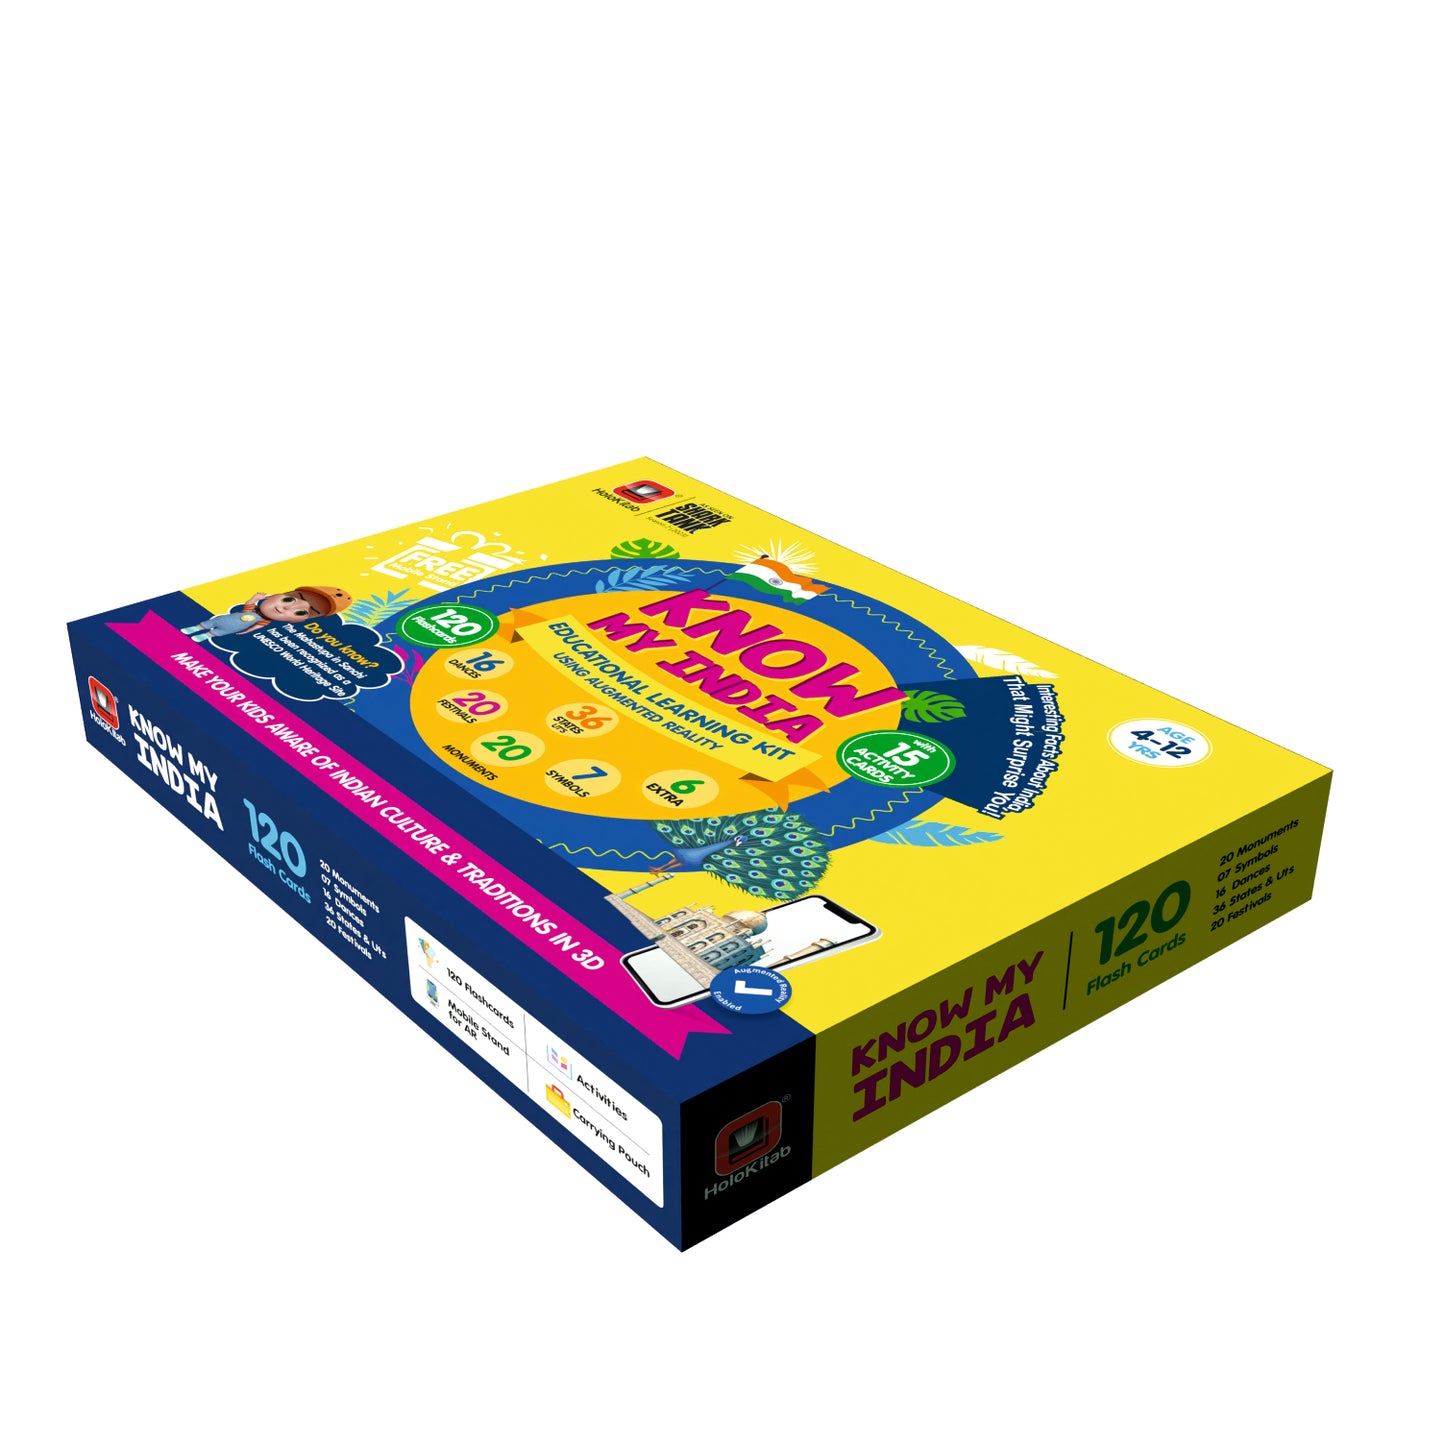 HoloKitab Combo Know my India Smart Learning Kit for Kids. Learn about Indian Dances, Monuments, Festivals, States UTs & National Symbols | 120 Flashcards | Activity Cards | AR Enabled | 4- 14 Yrs